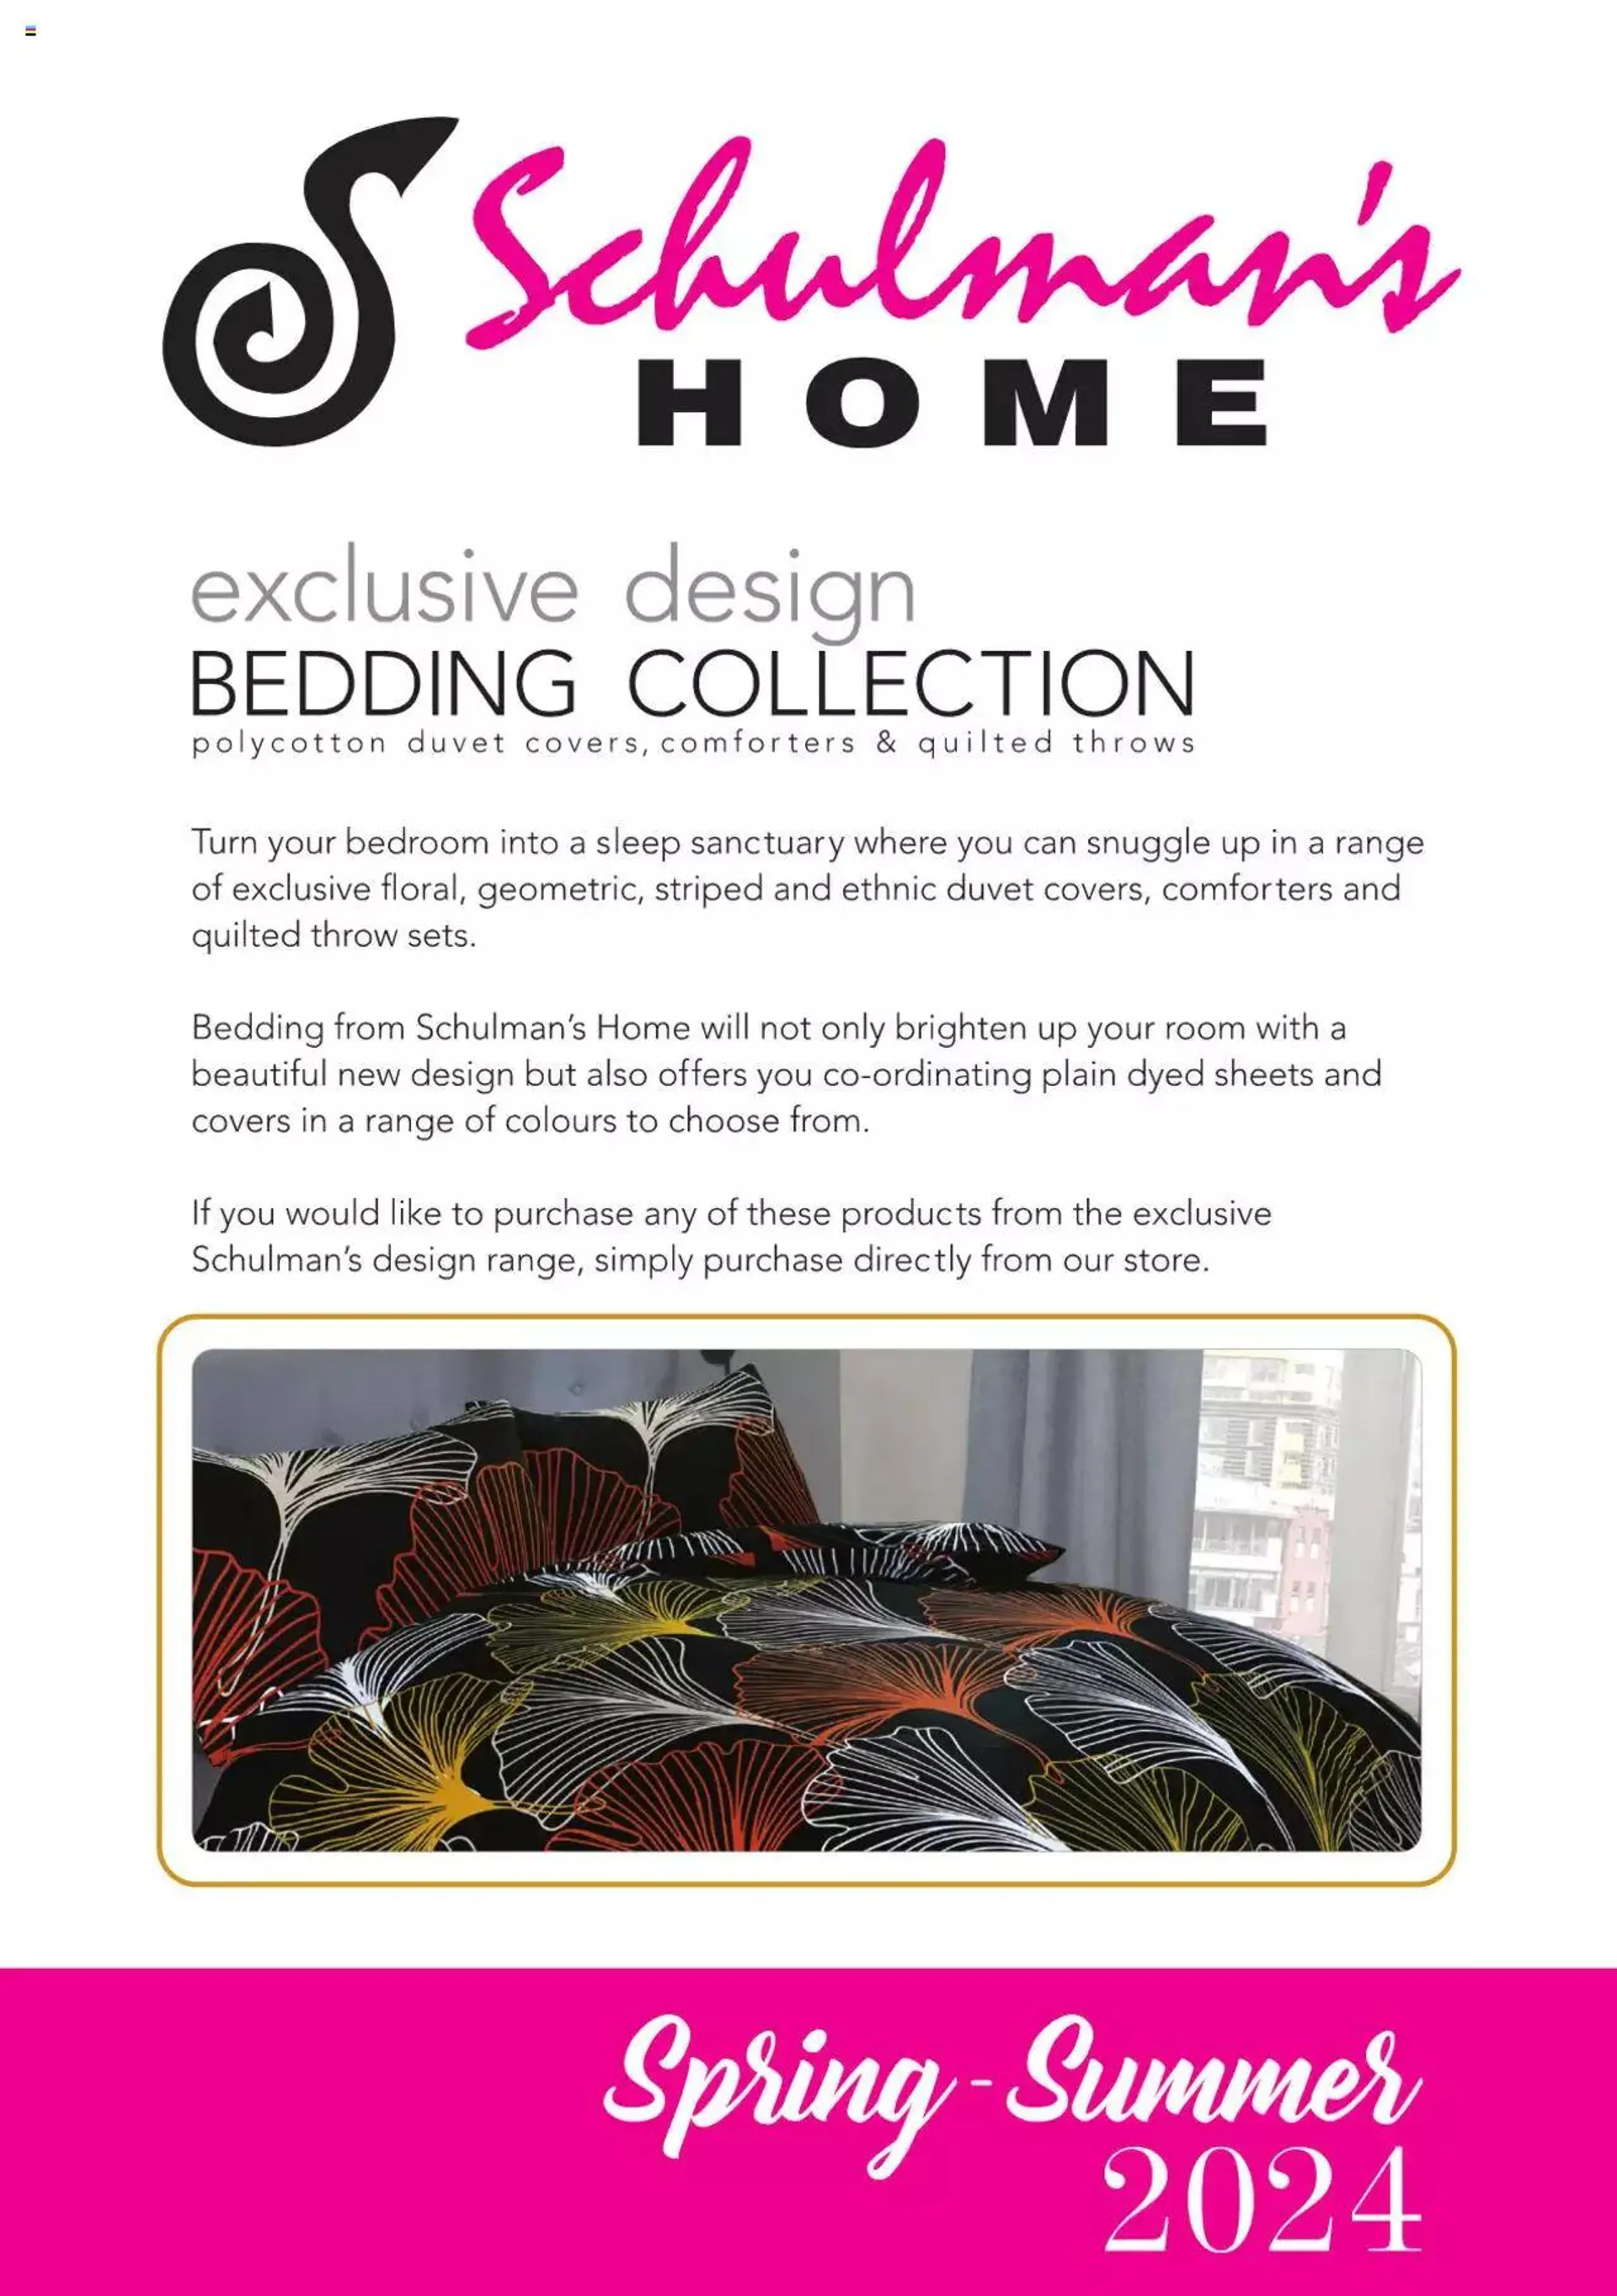 Schulman's Home - Bedding Collection 2024 - 1 January 31 December 2024 - Page 1